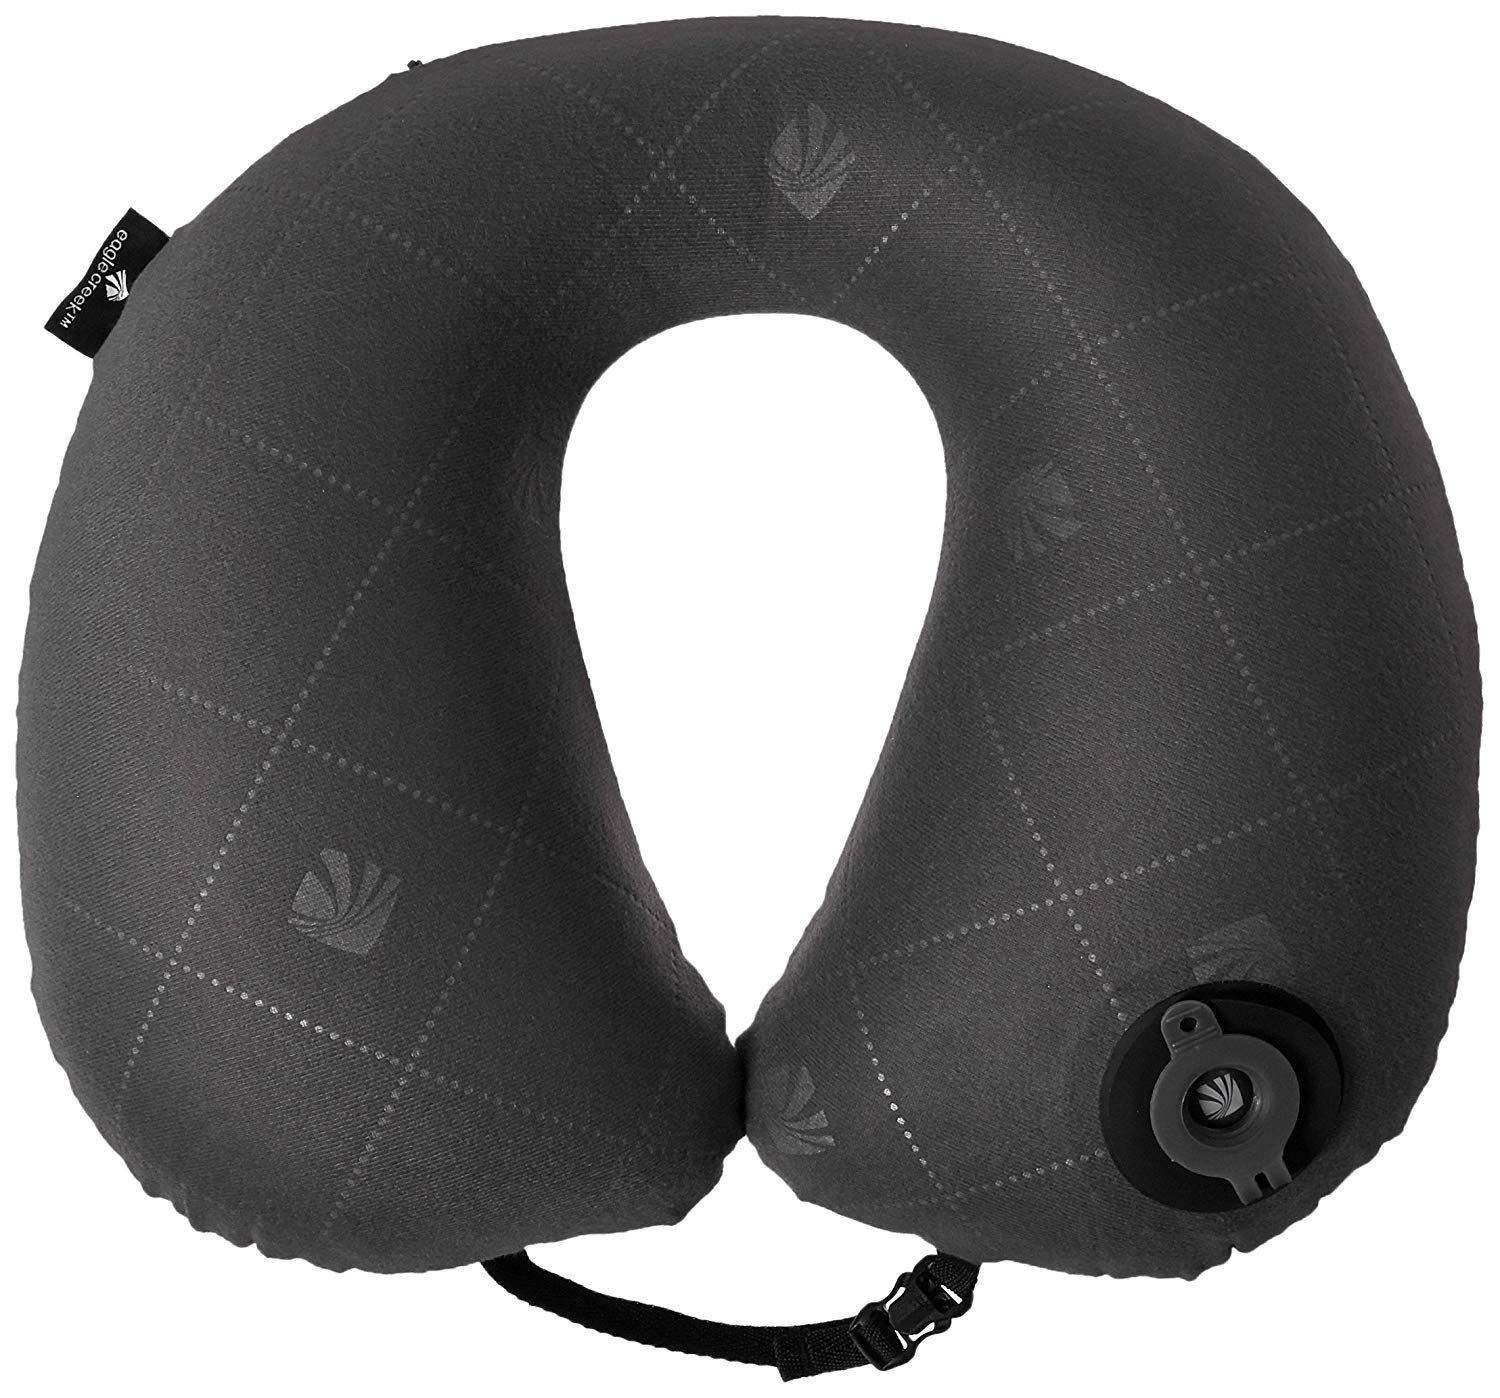  blow up neck pillow for plane